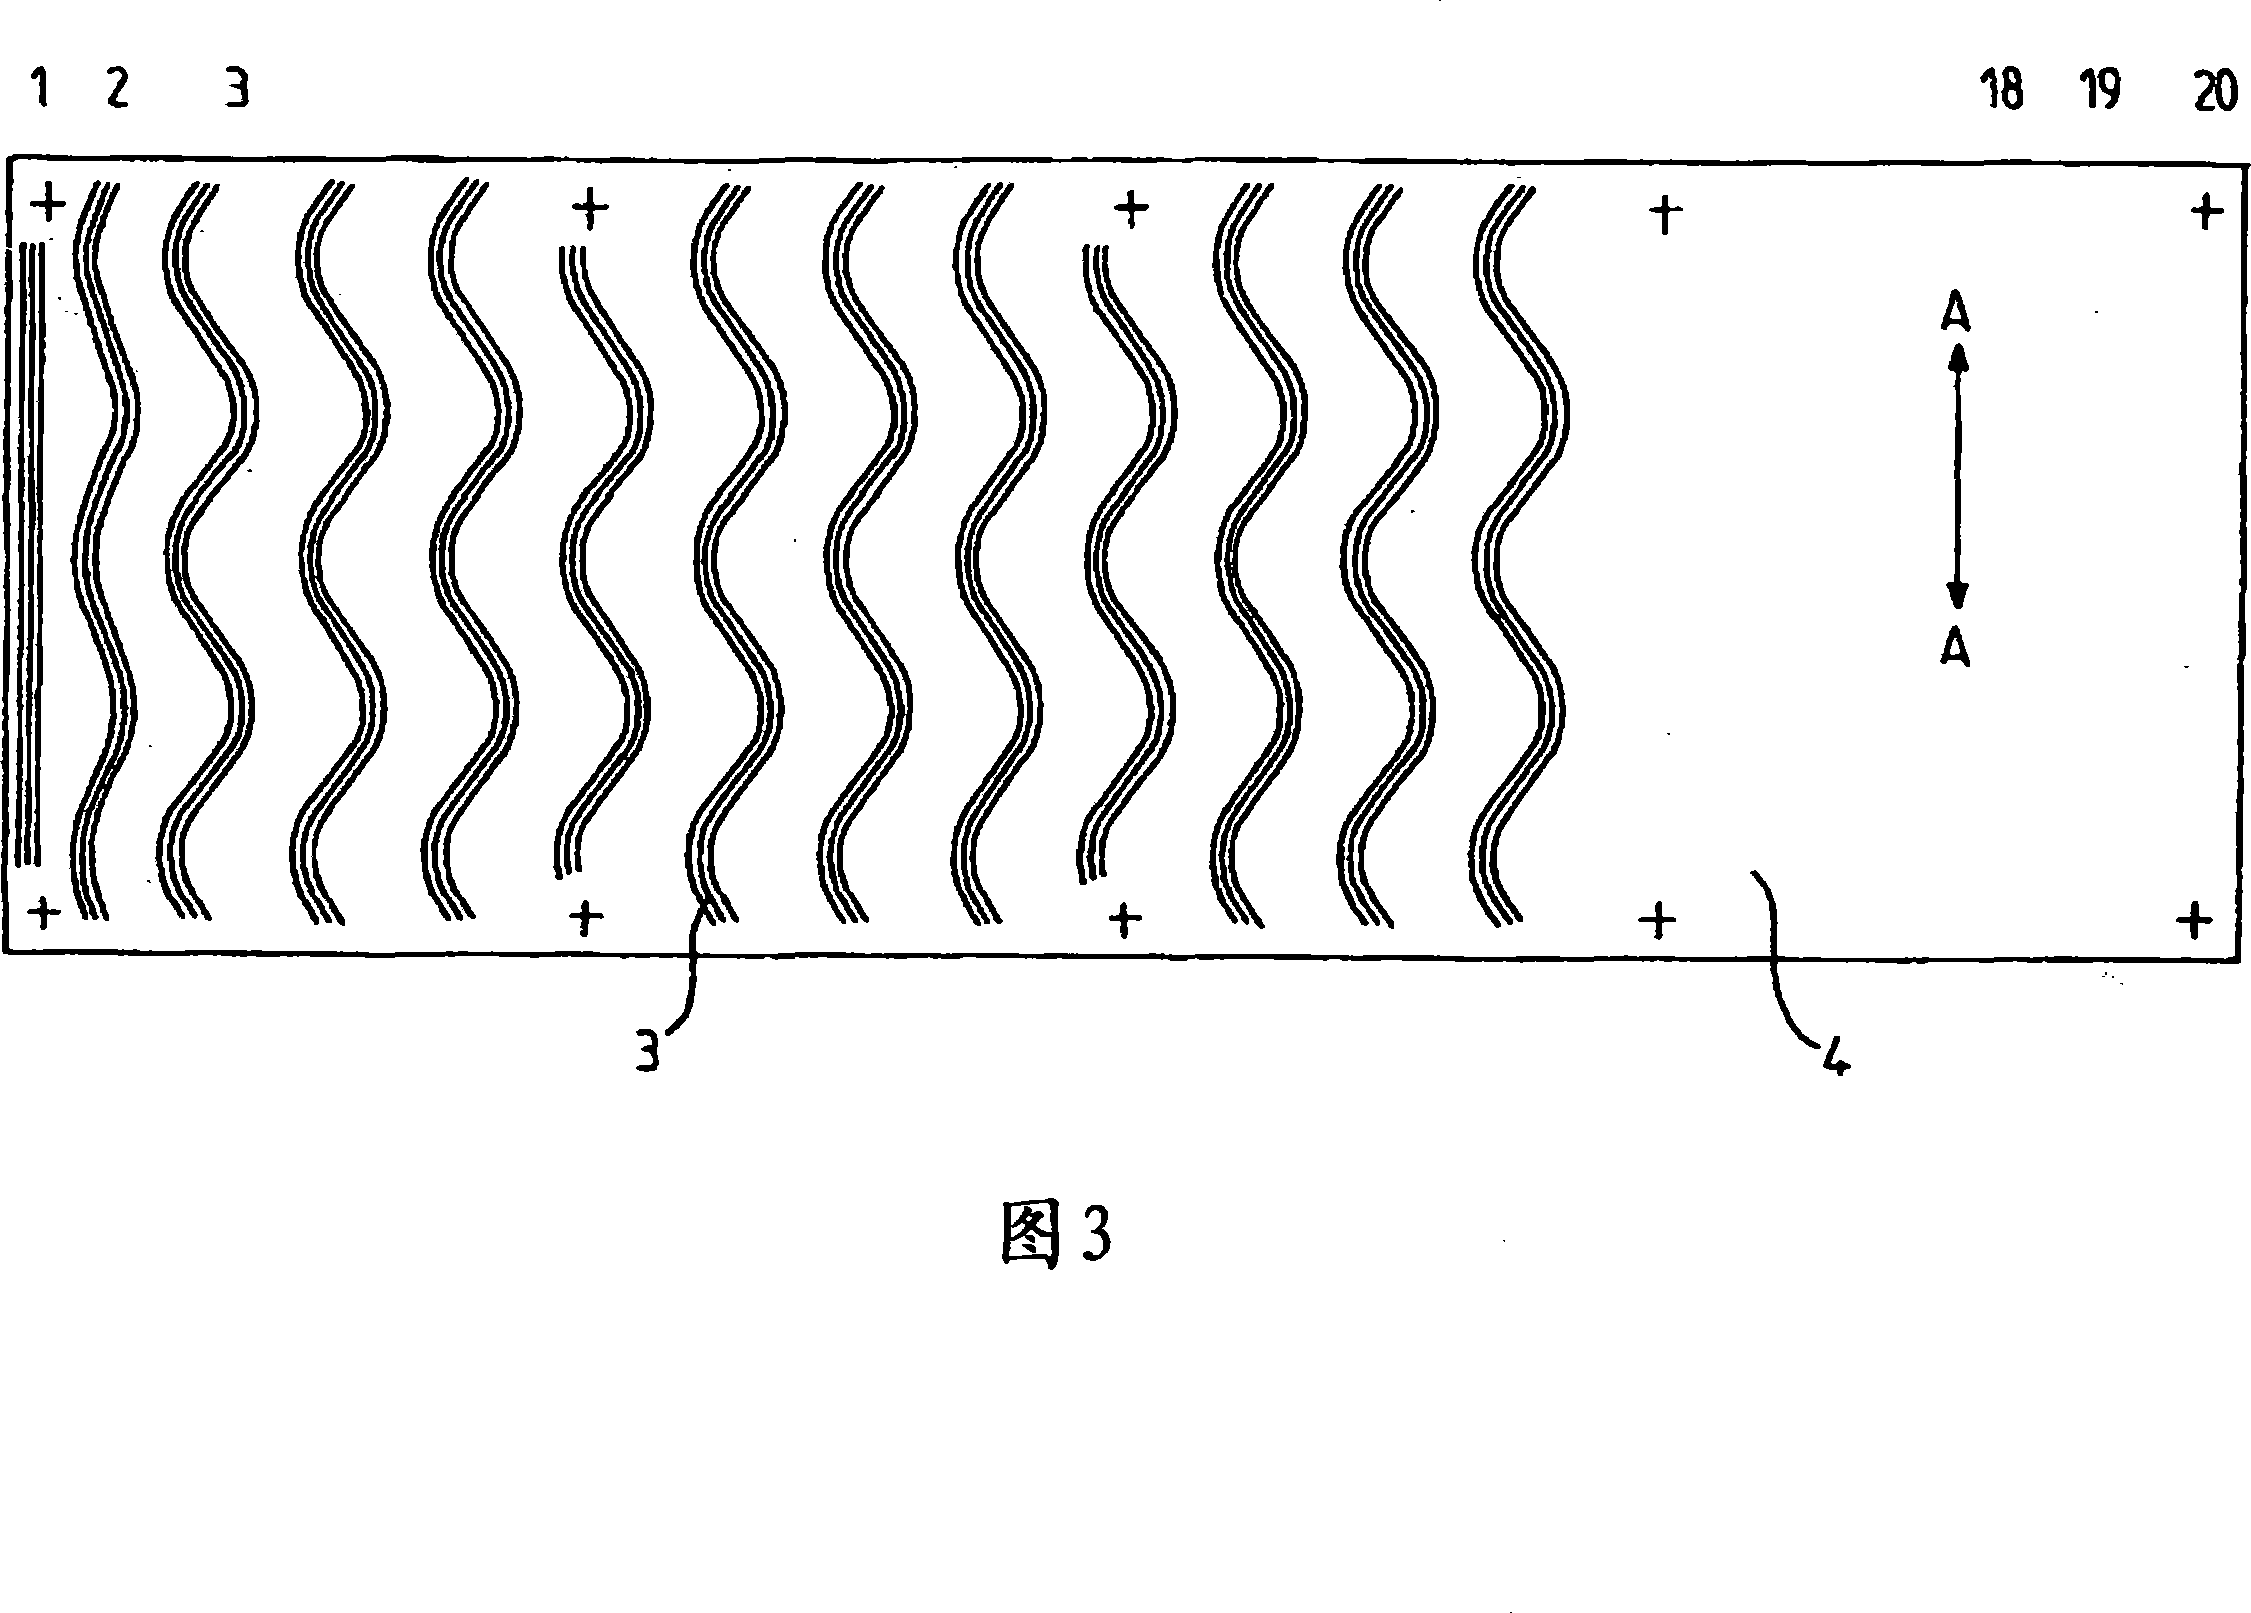 Method for adhesively fixing liquid gas adiabatic apparatus by undulance adhesive strip